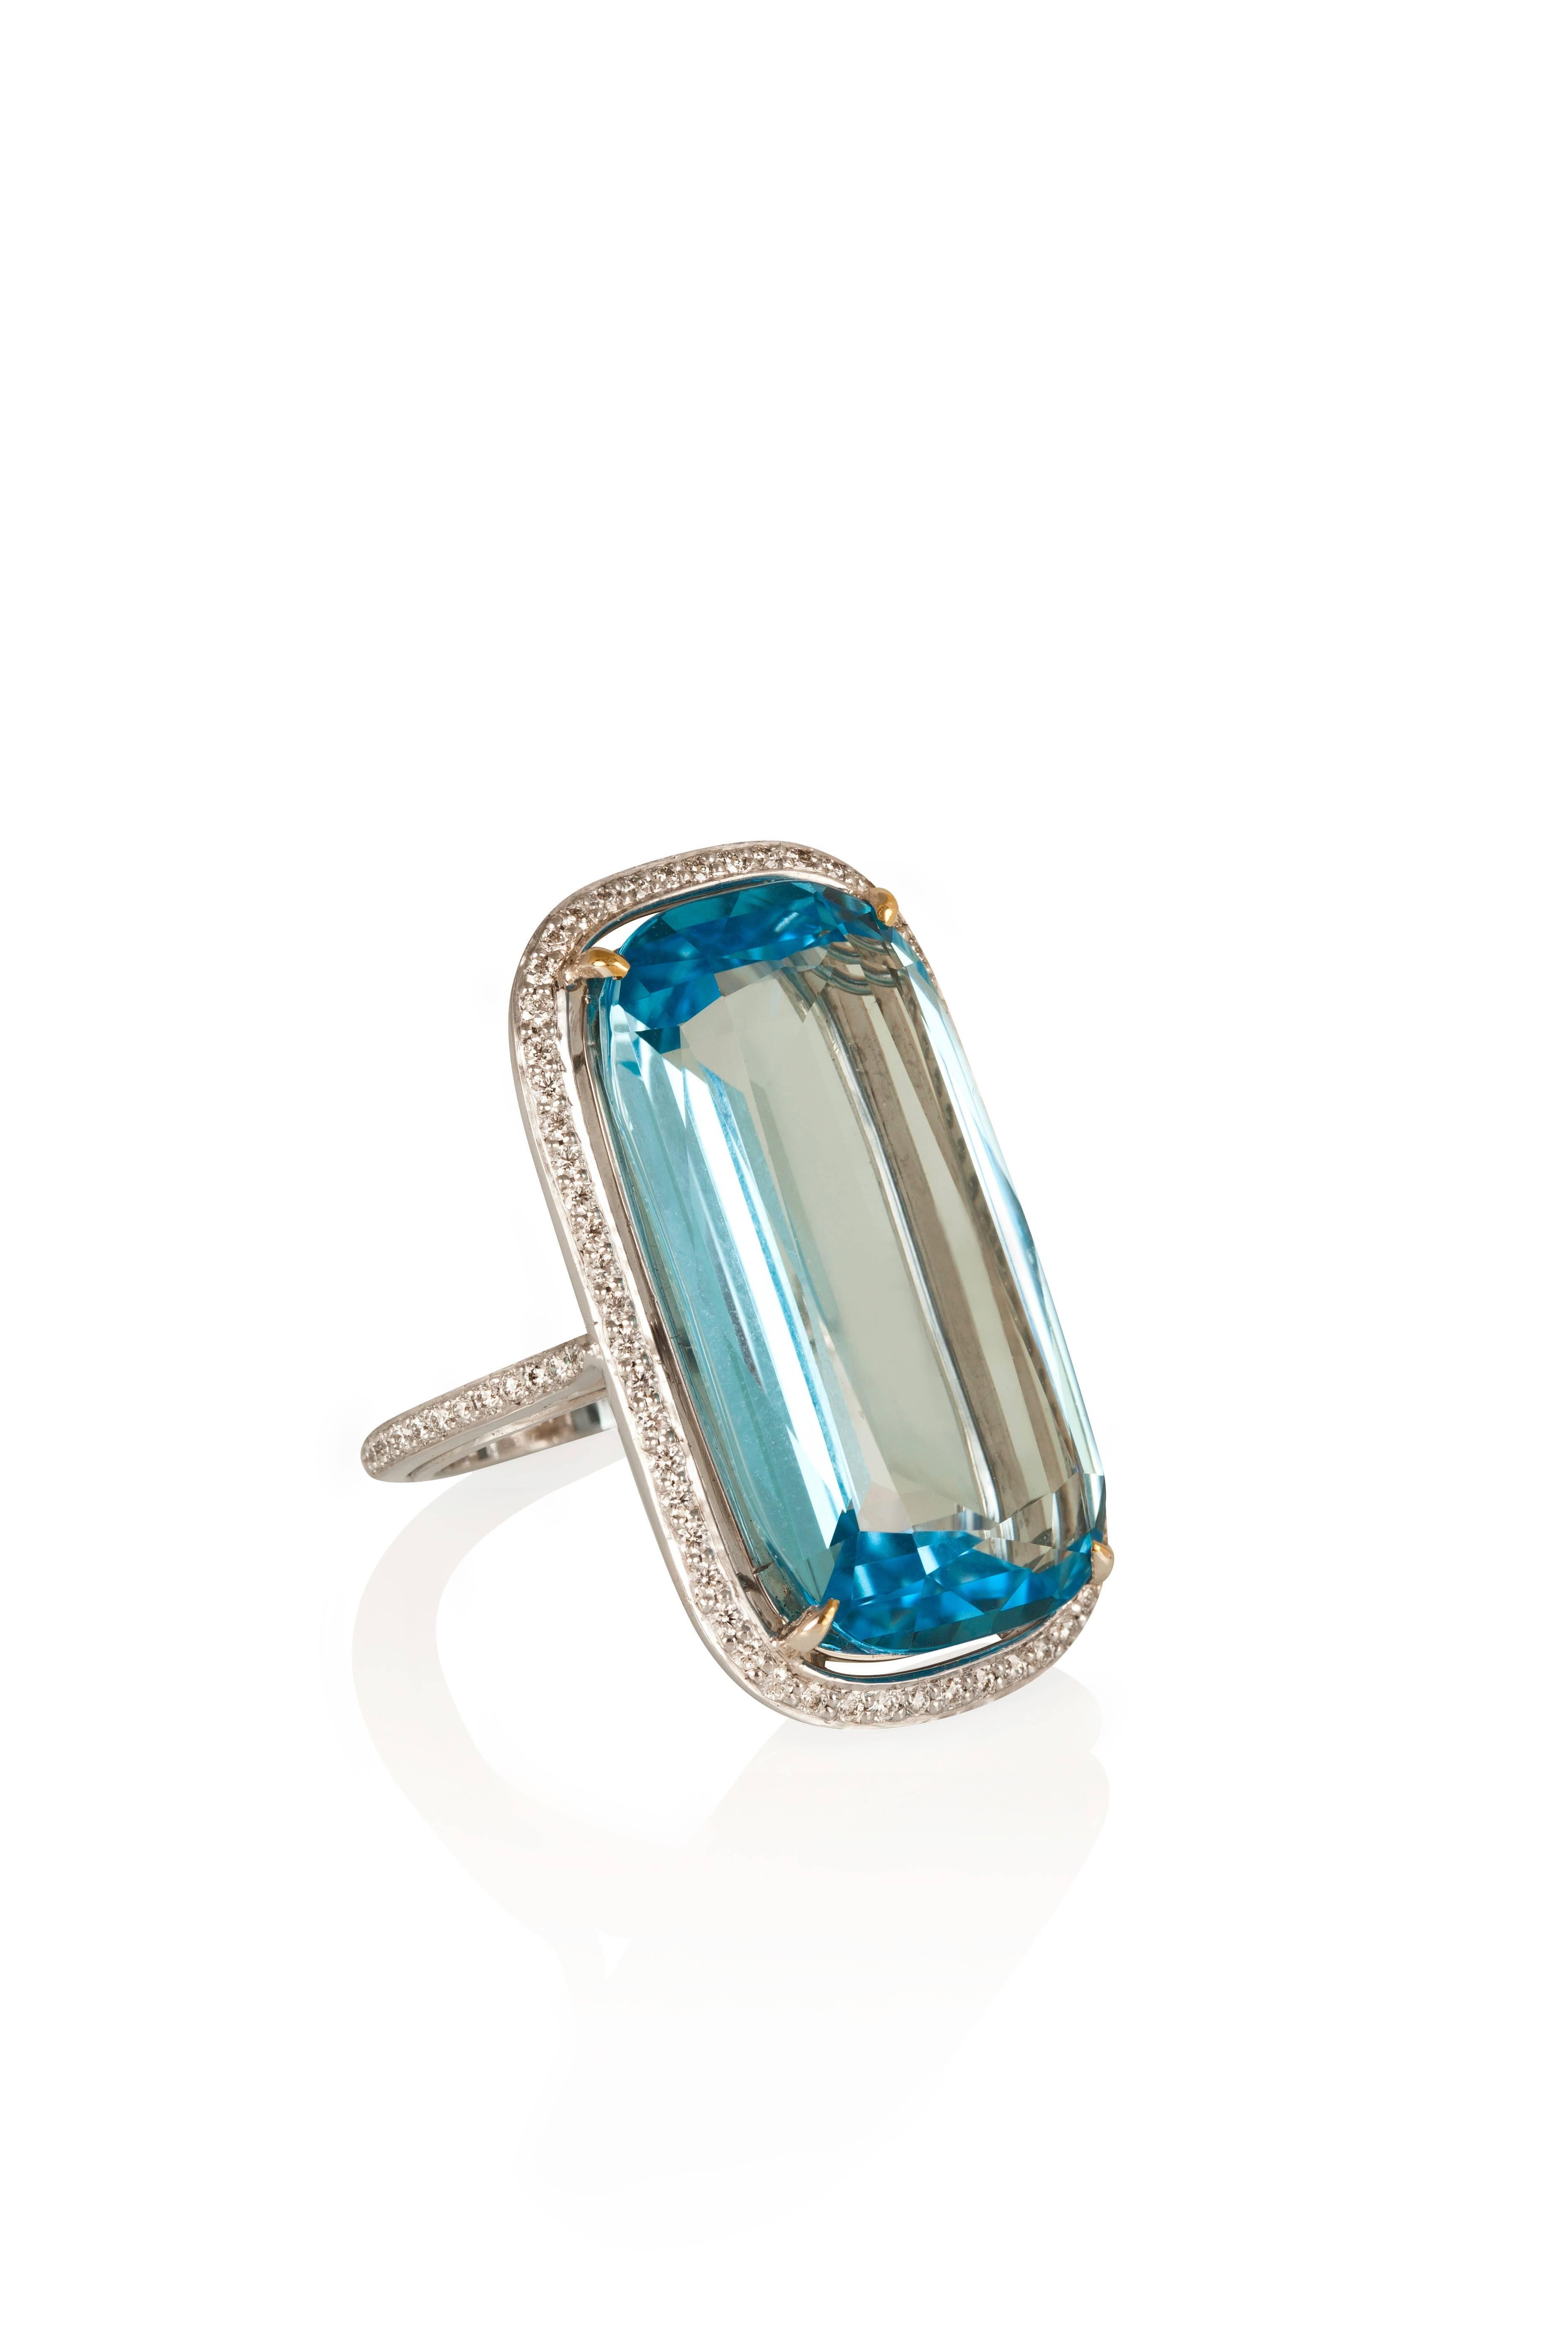 The very definition of “chic,” this ring boasts a gorgeous cushion-cut blue topaz weighin 37.77 carats surrounded by a halo of diamonds and a shank also lined with diamonds, mounted in 18- karat white gold.
Ring size: 7.75

CREDENTIALS
• Markers